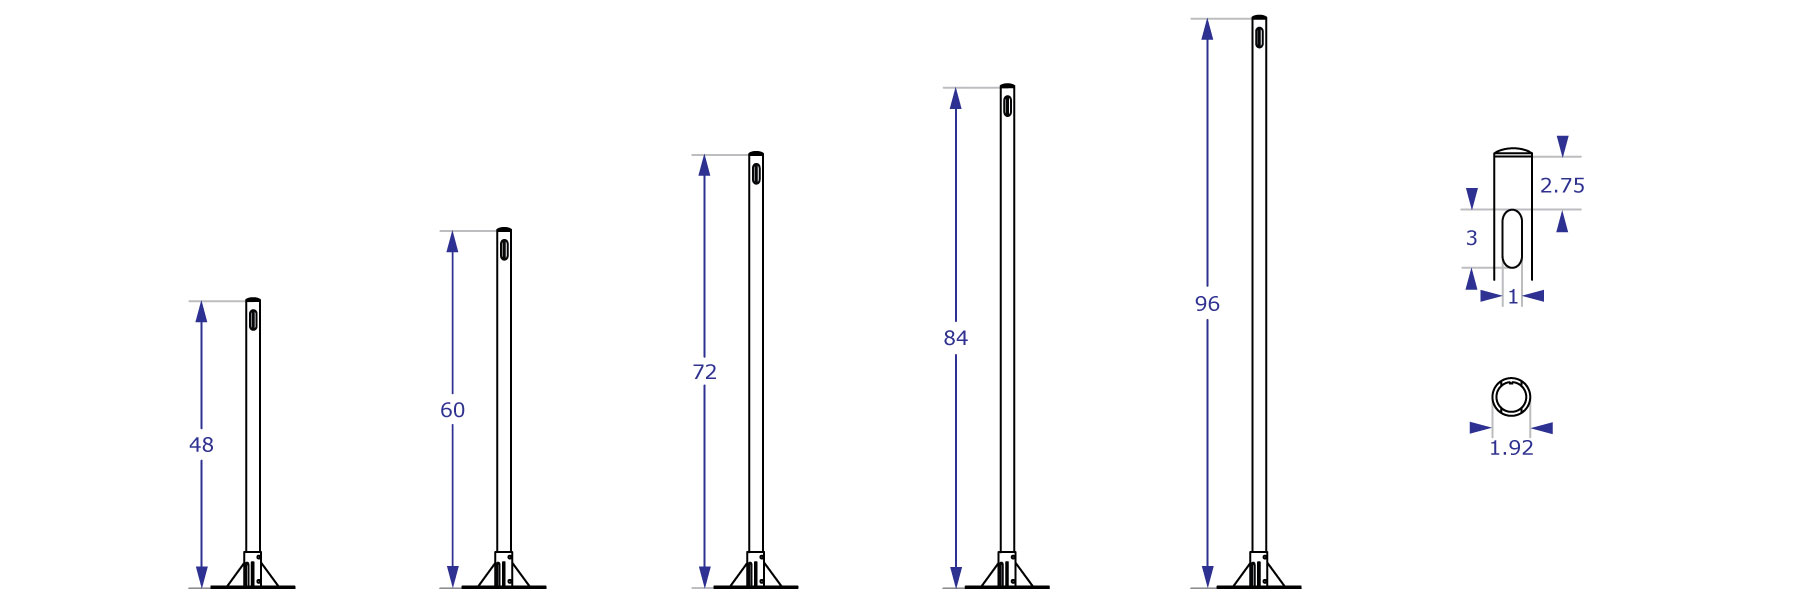 TRIPLE-192 pole floor stand specification drawings showing five available pole lengths